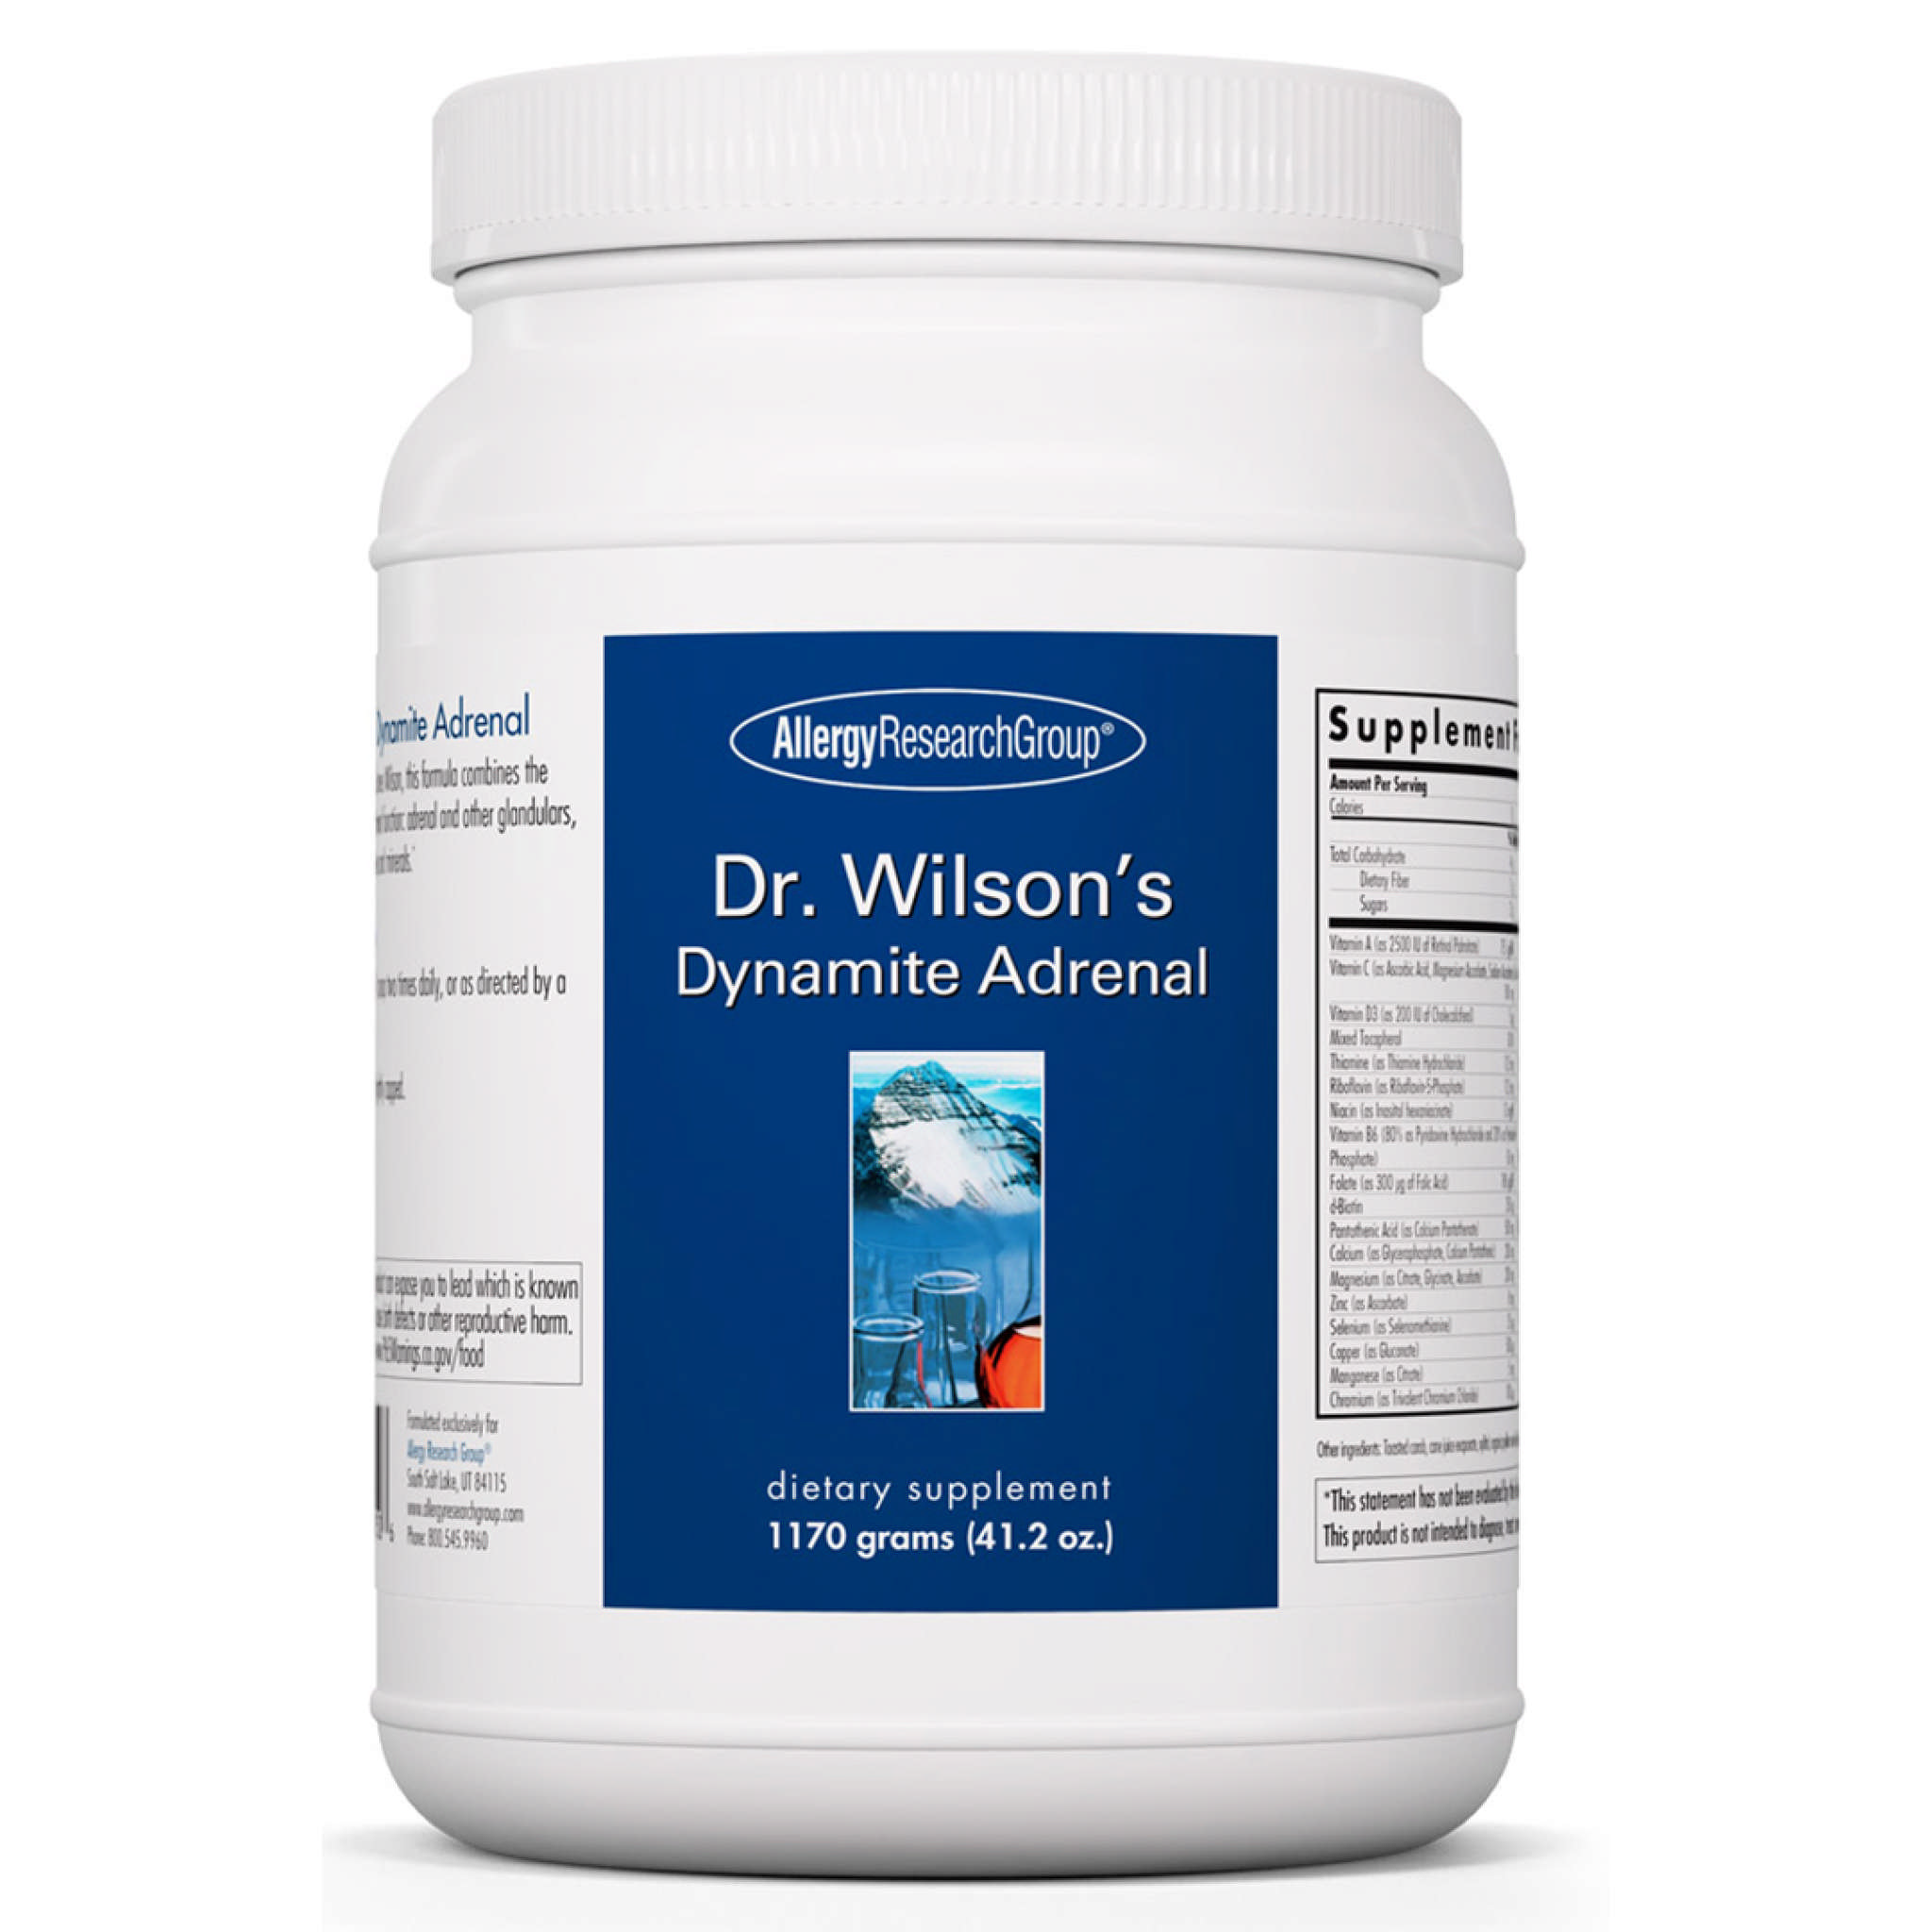 Allergy Research Group - Dynamite Adrenal Dr Wilson powder